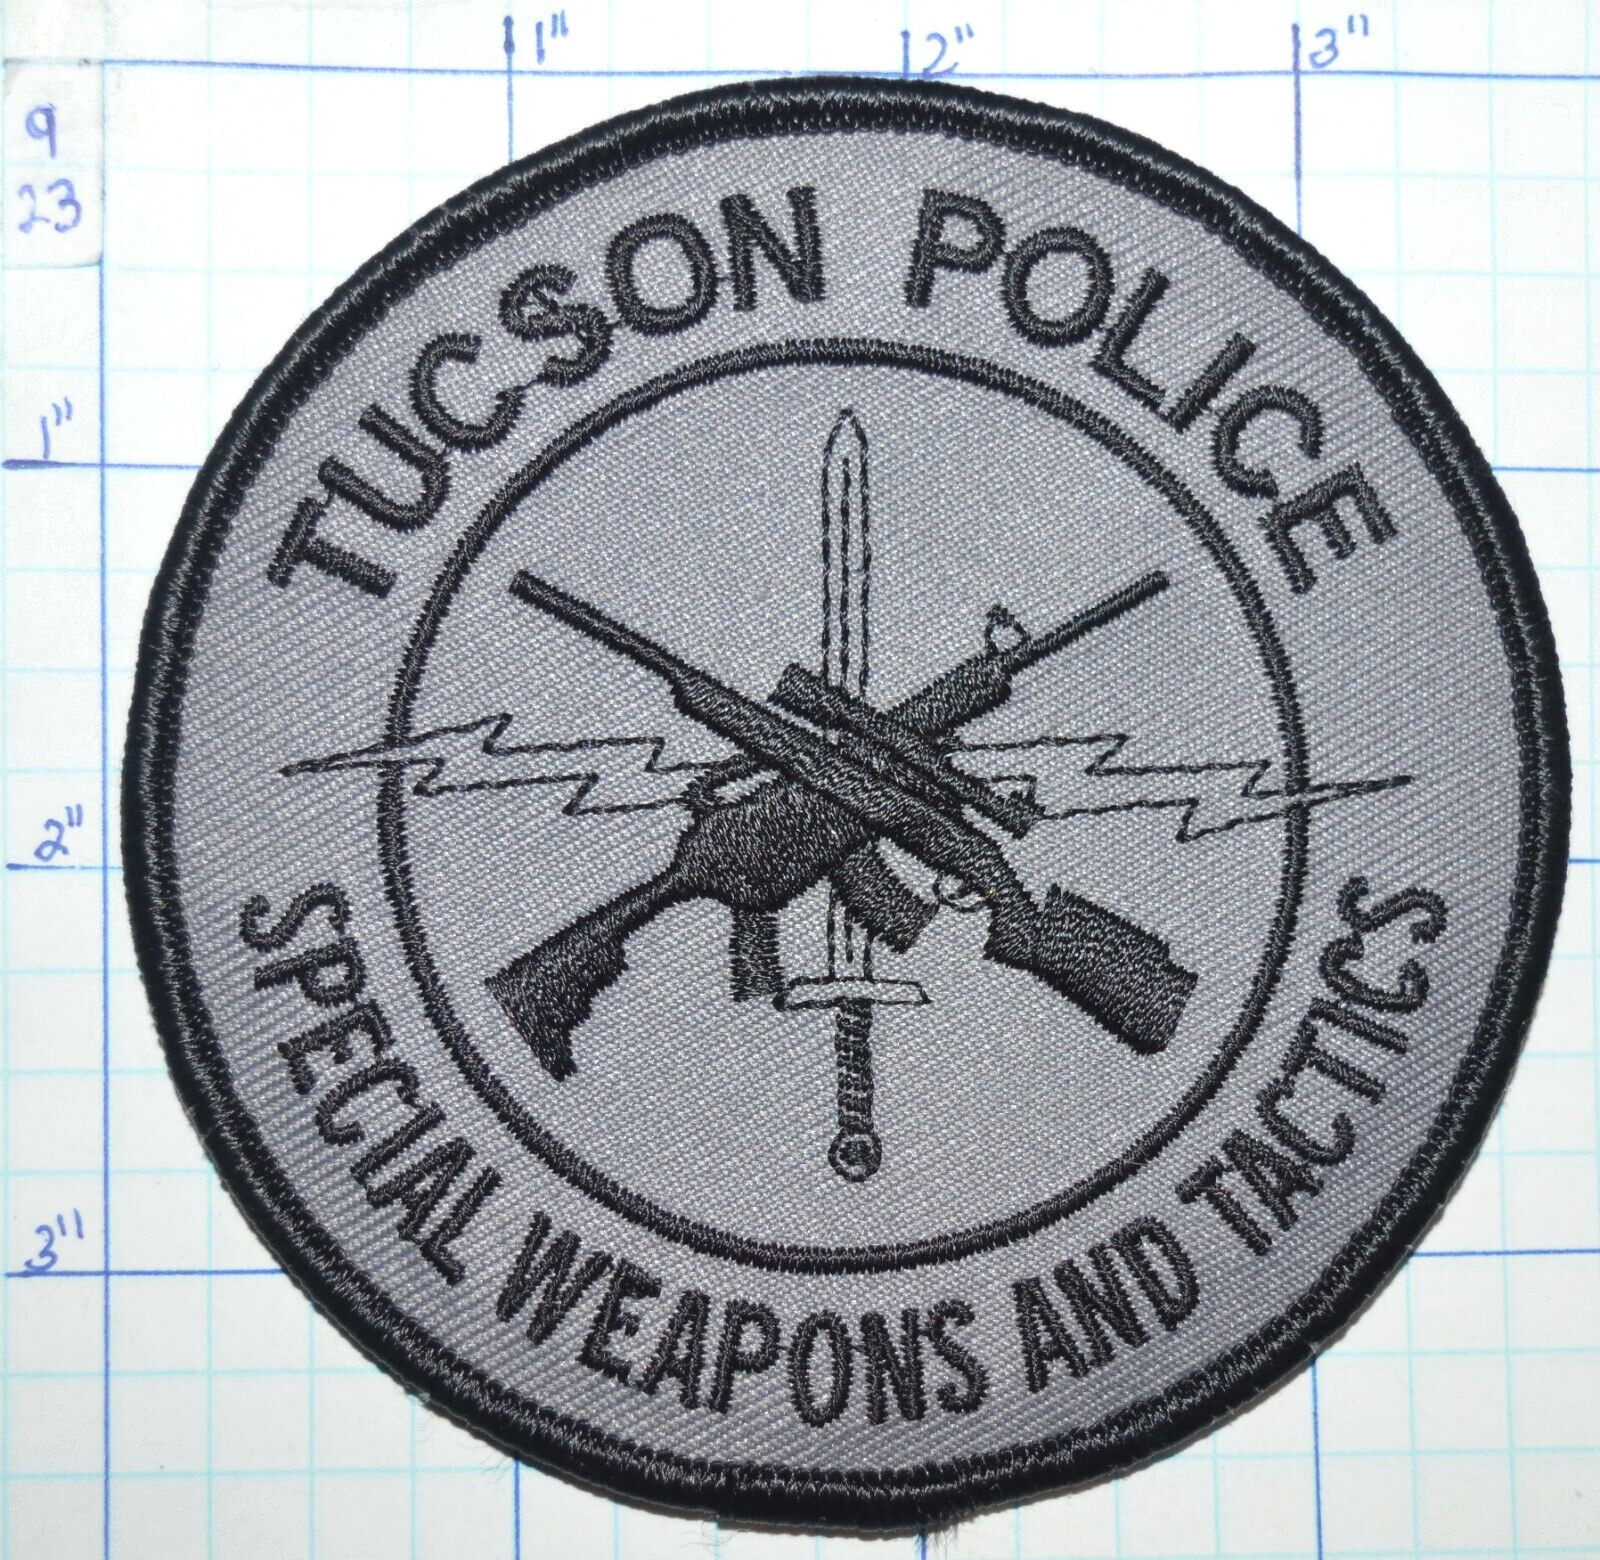 ARIZONA, TUCSON POLICE SWAT SPECIAL WEAPONS & TACTICS HOOK & LOOP BACK PATCH